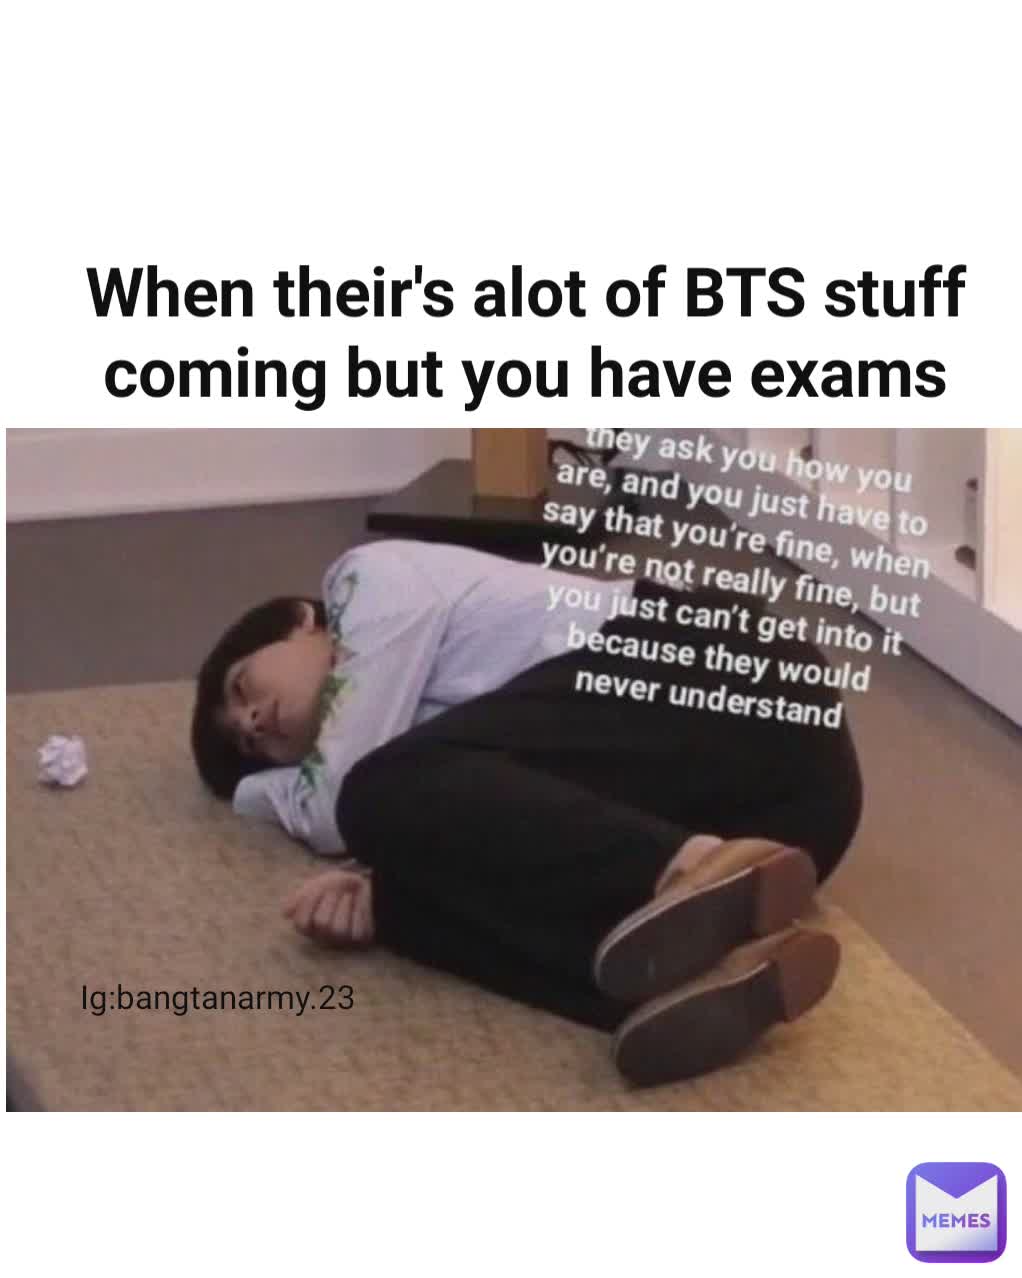 When their's alot of BTS stuff coming but you have exams Ig:bangtanarmy.23